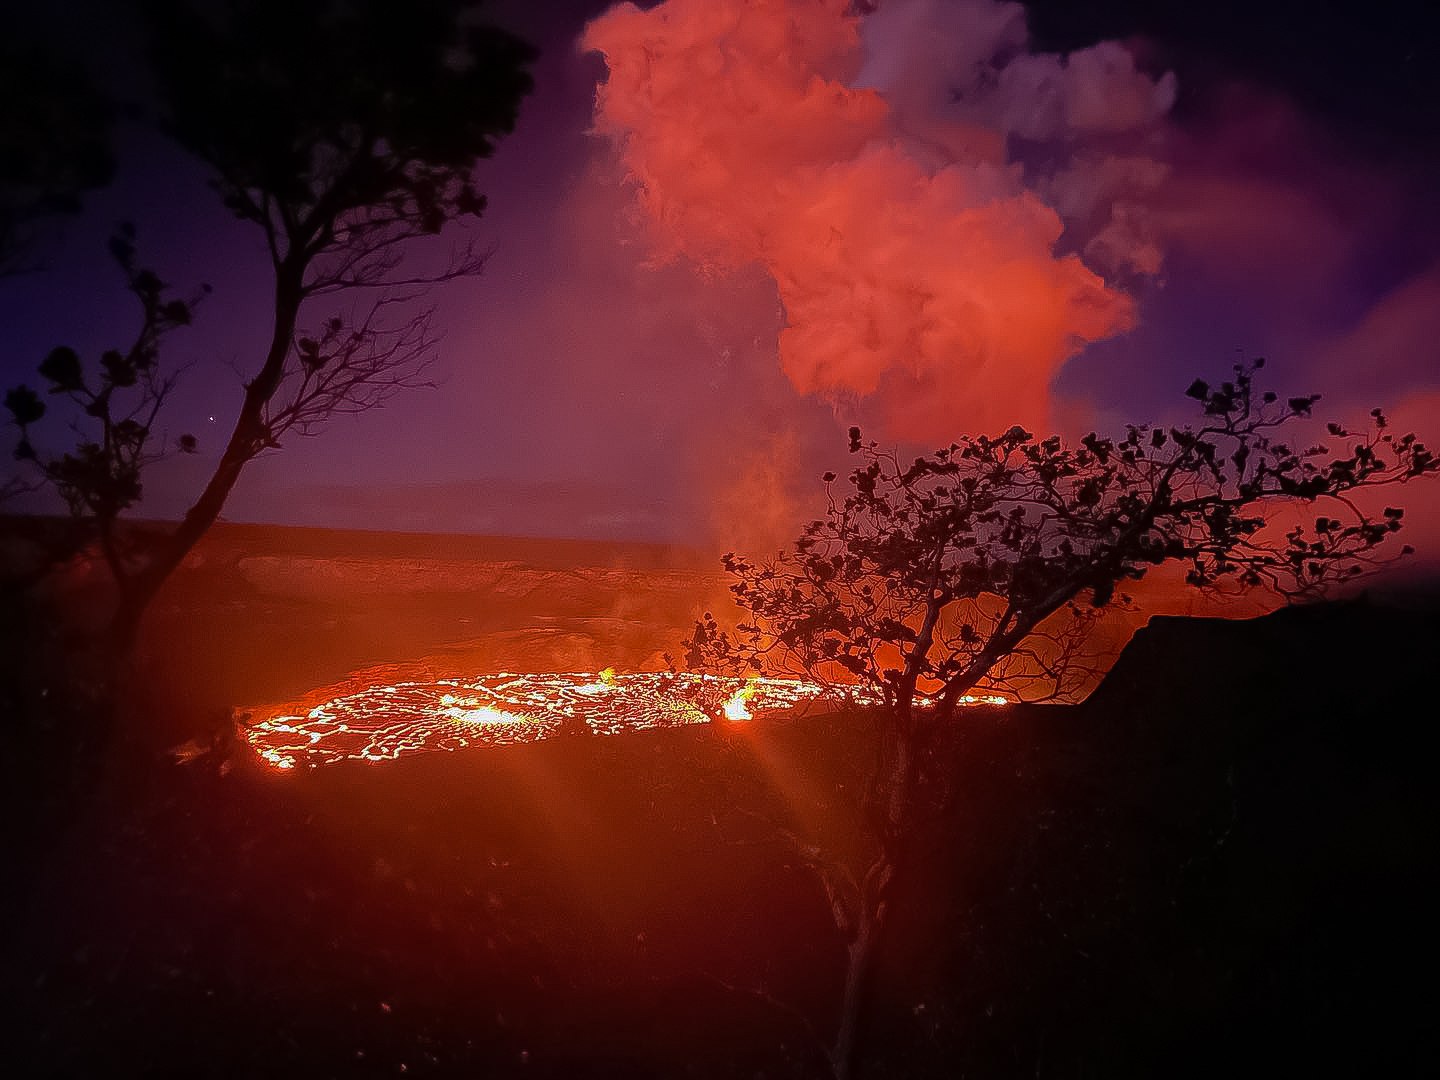 view the glowing lava inside the active volcanic crater that brightens up the night sky wasabi tours hawaii